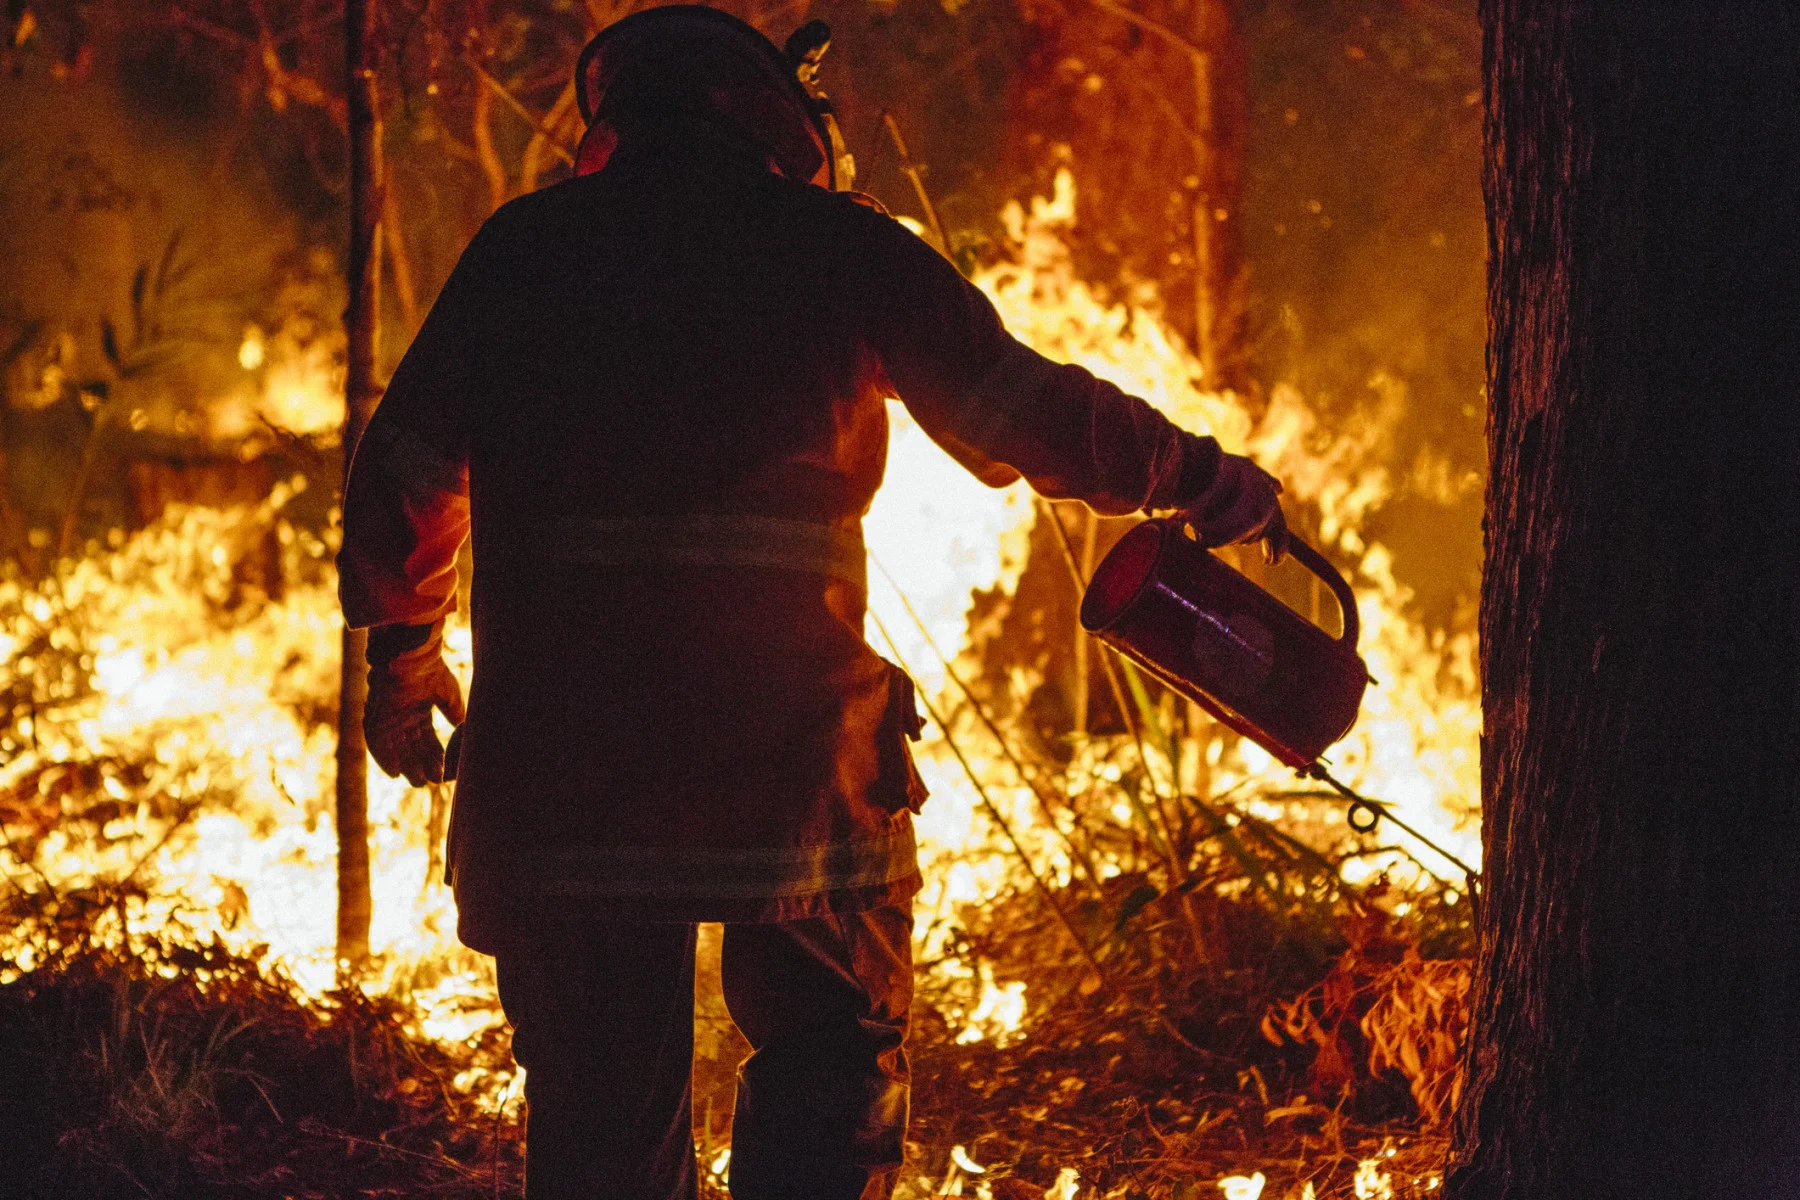 A firefighter conducting a controlled burn with a drip torch in Lower Beechmont, Australia. (Cavan Images/ Getty Images)